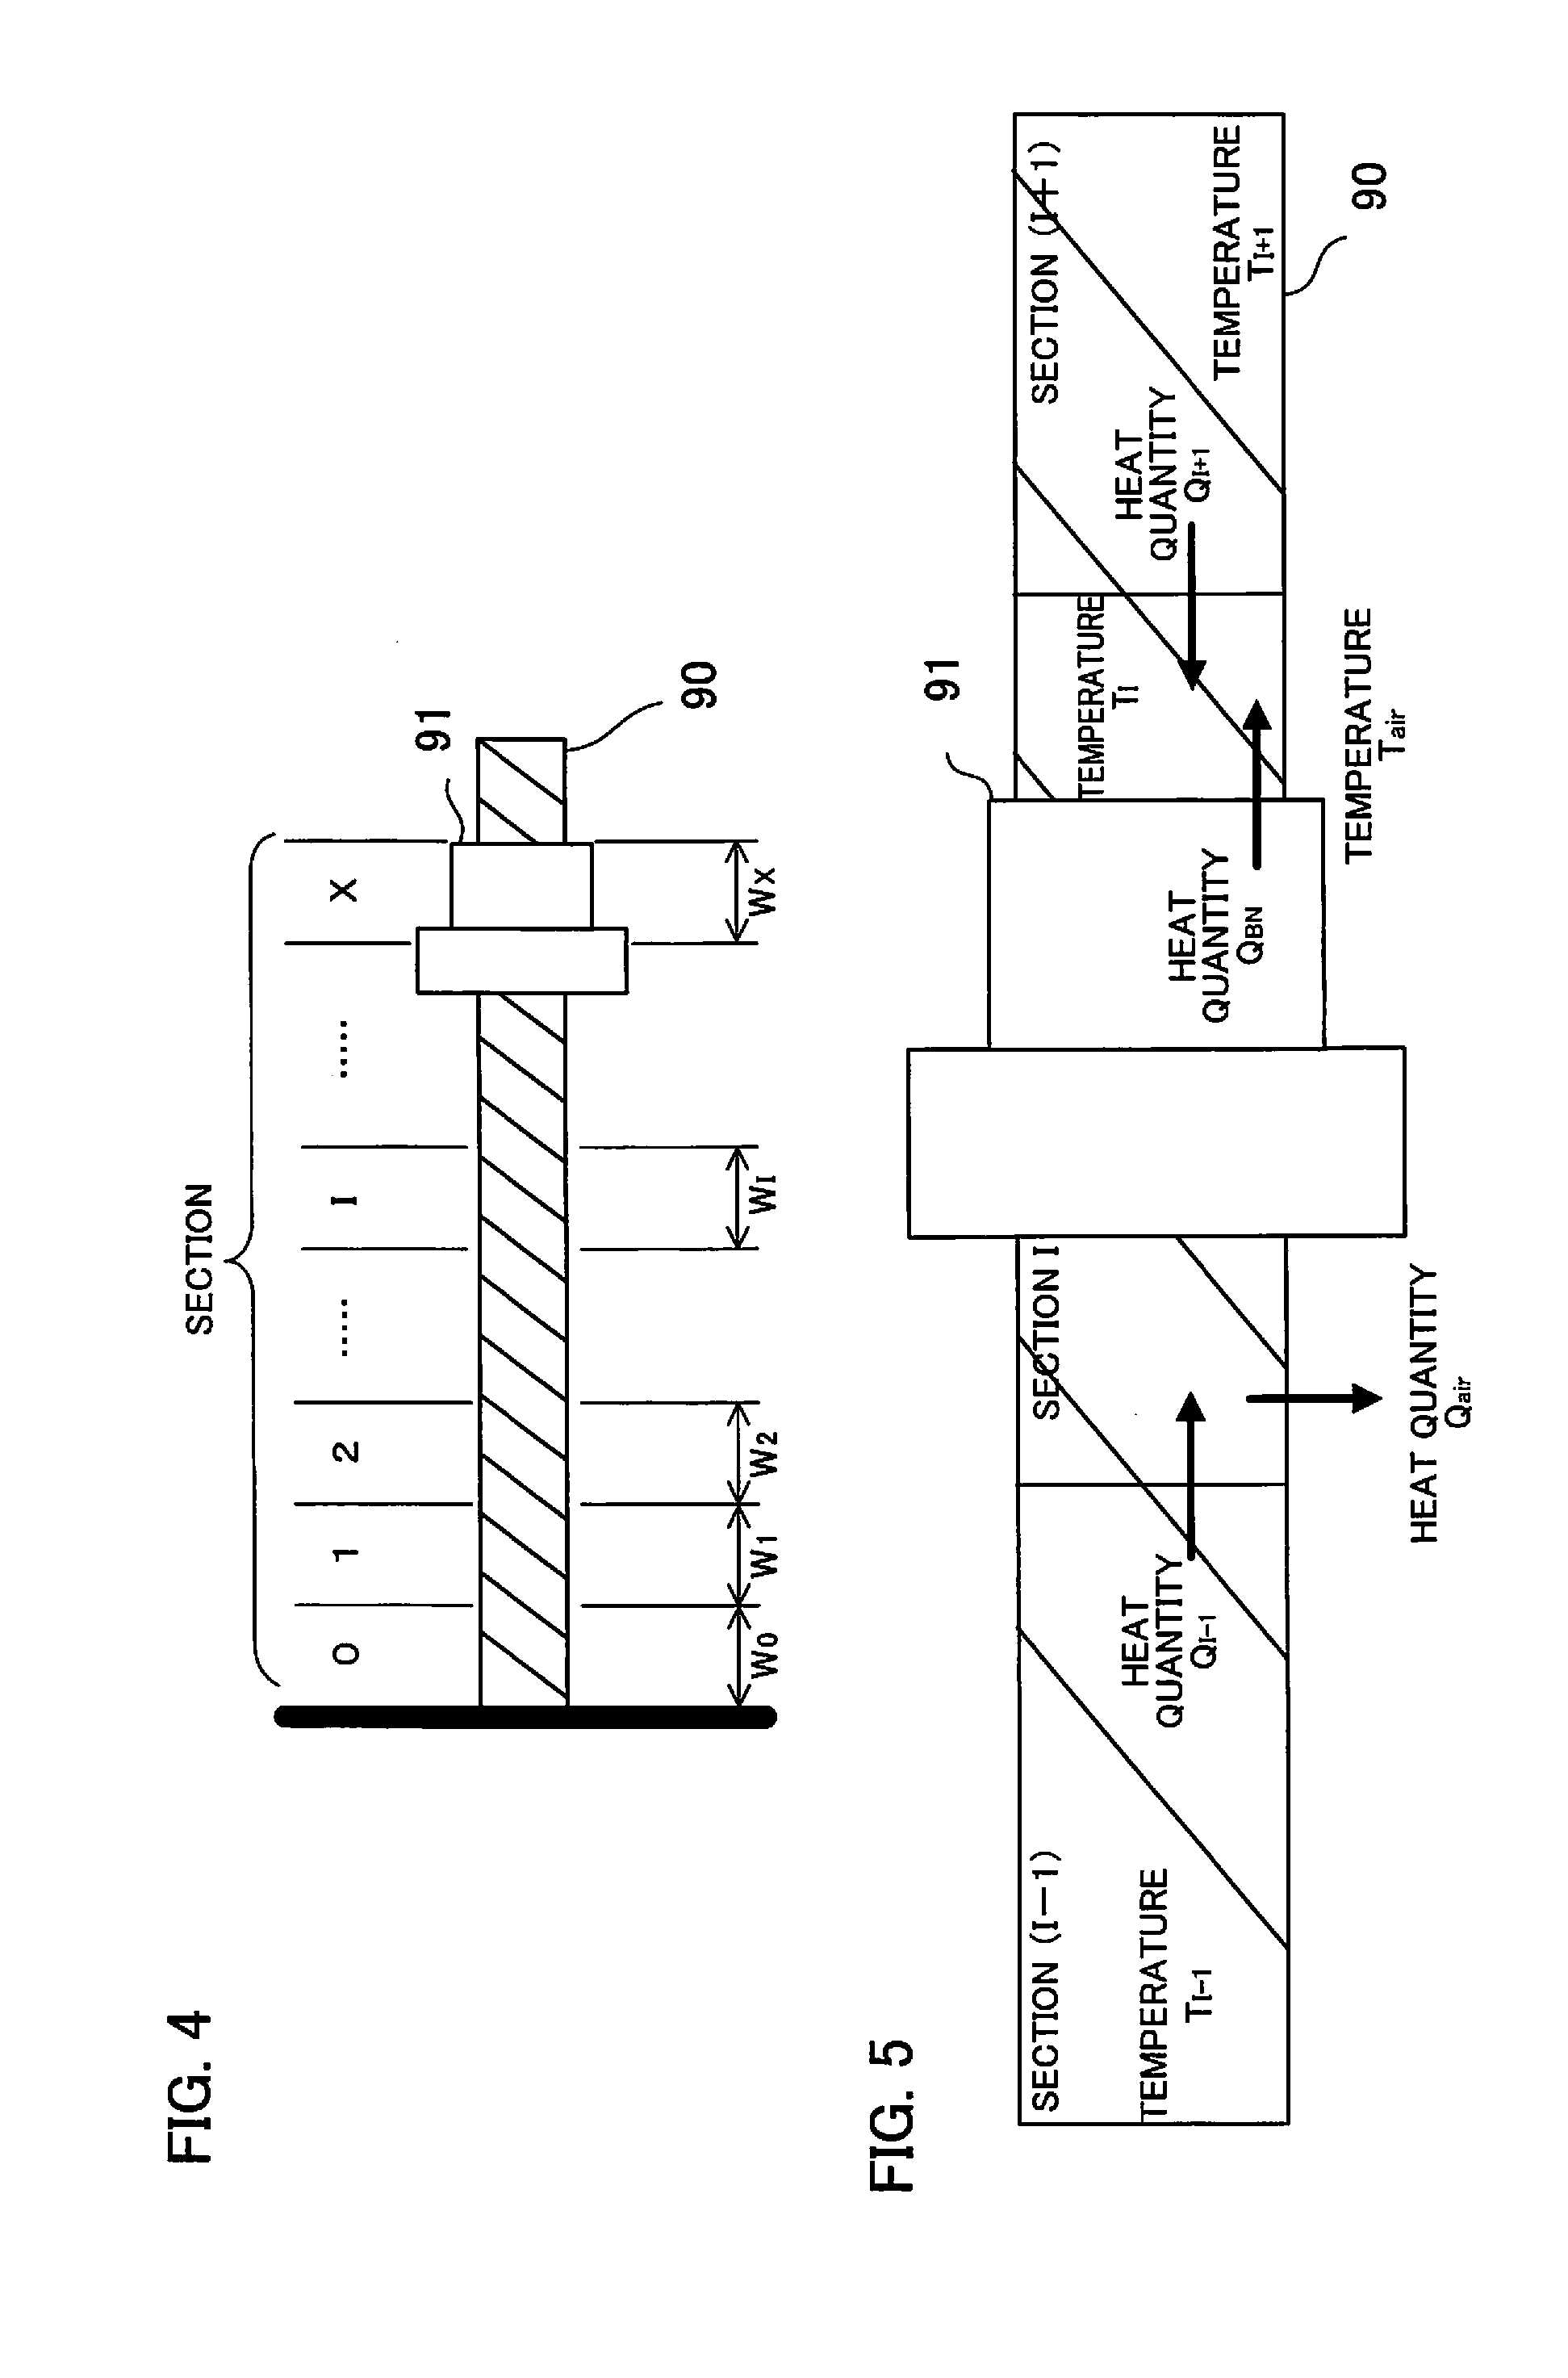 Controller for machine tool